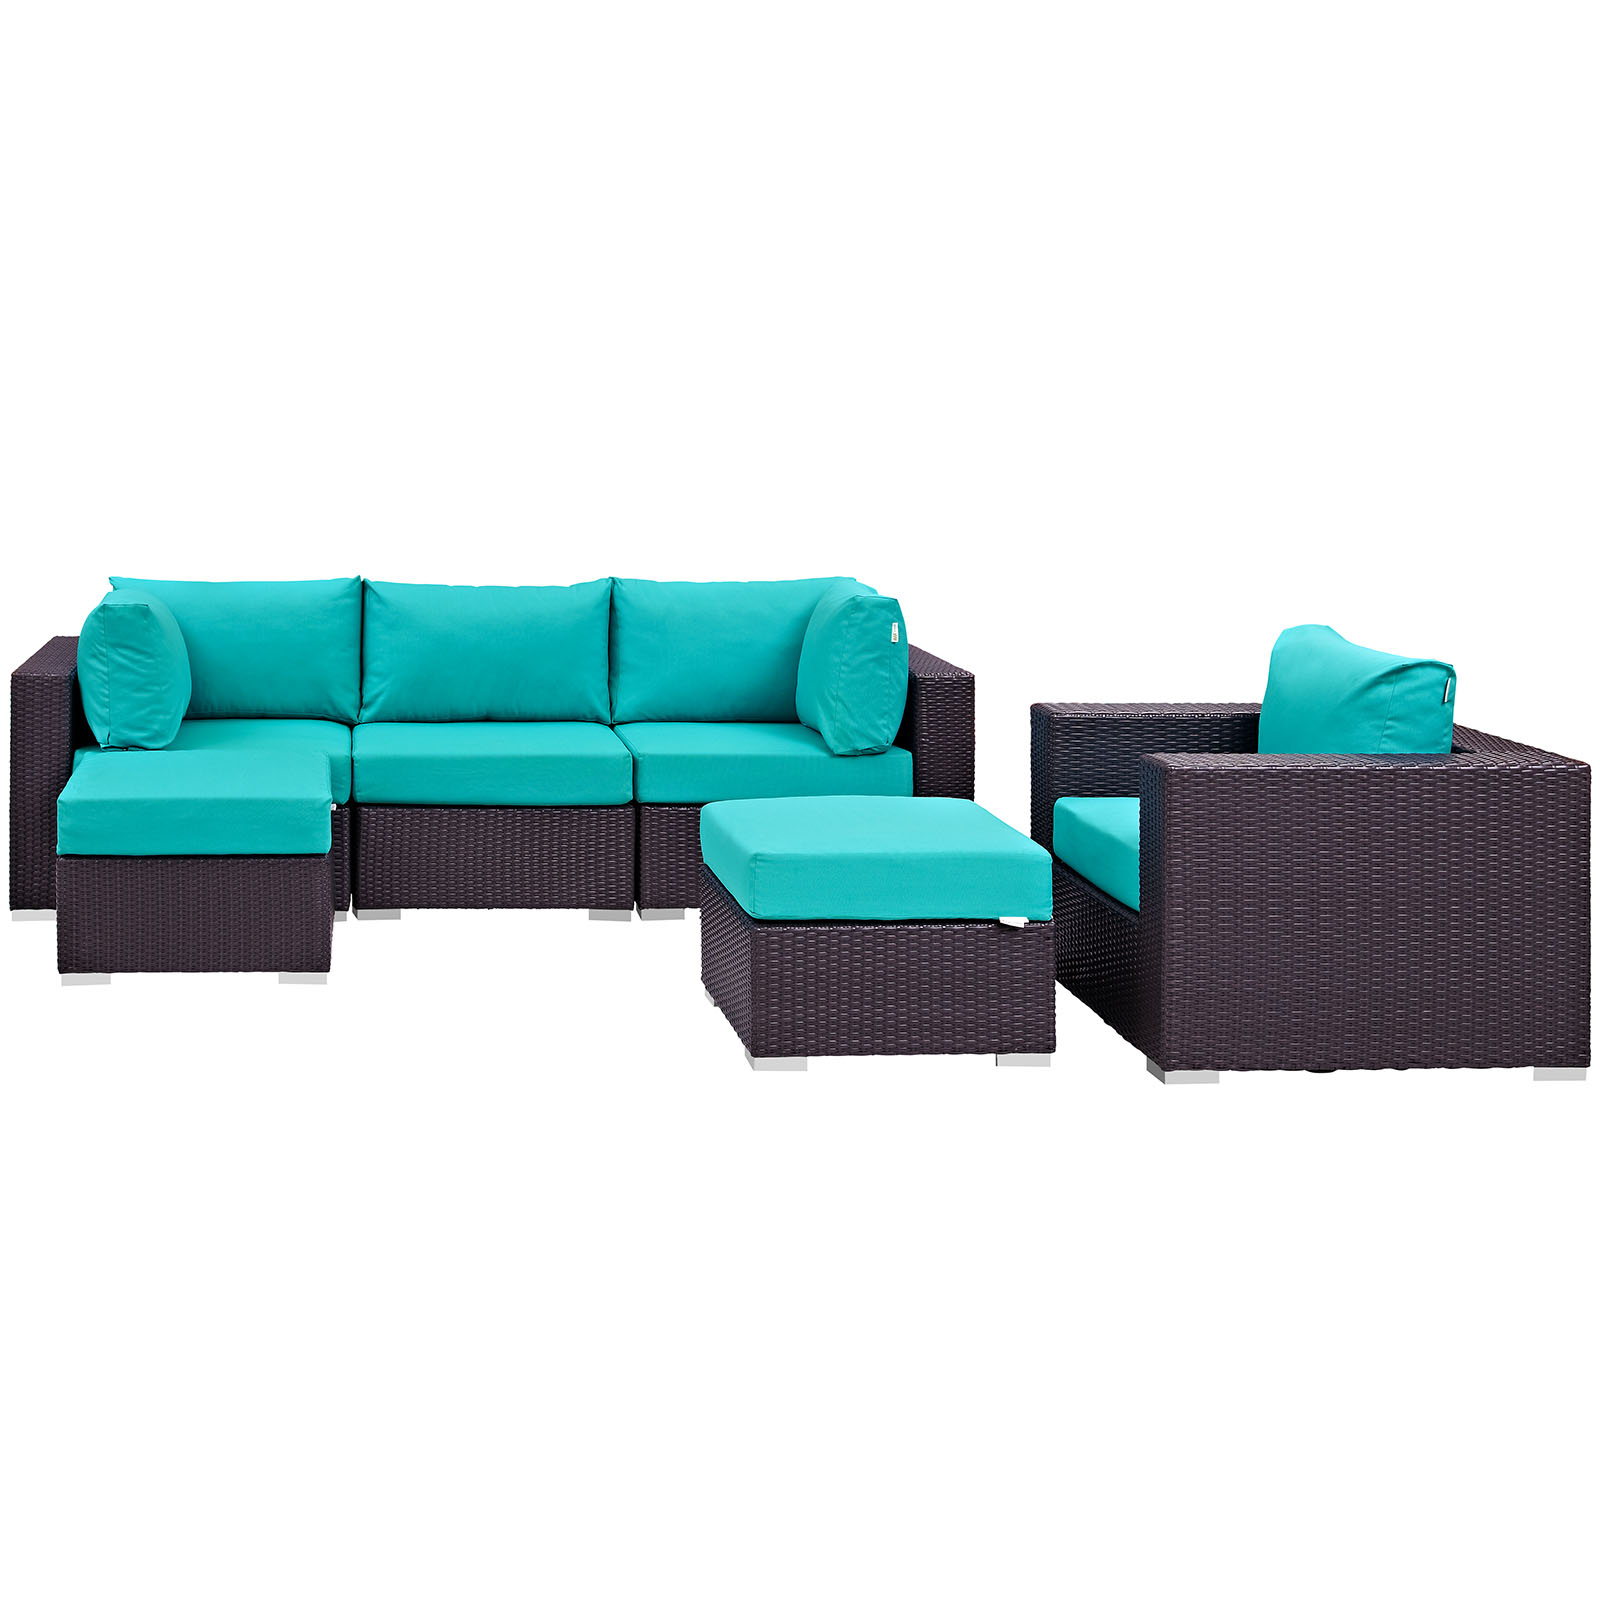 Modway Convene 6 Piece Outdoor Patio Sectional Set in Espresso Turquoise - image 4 of 8